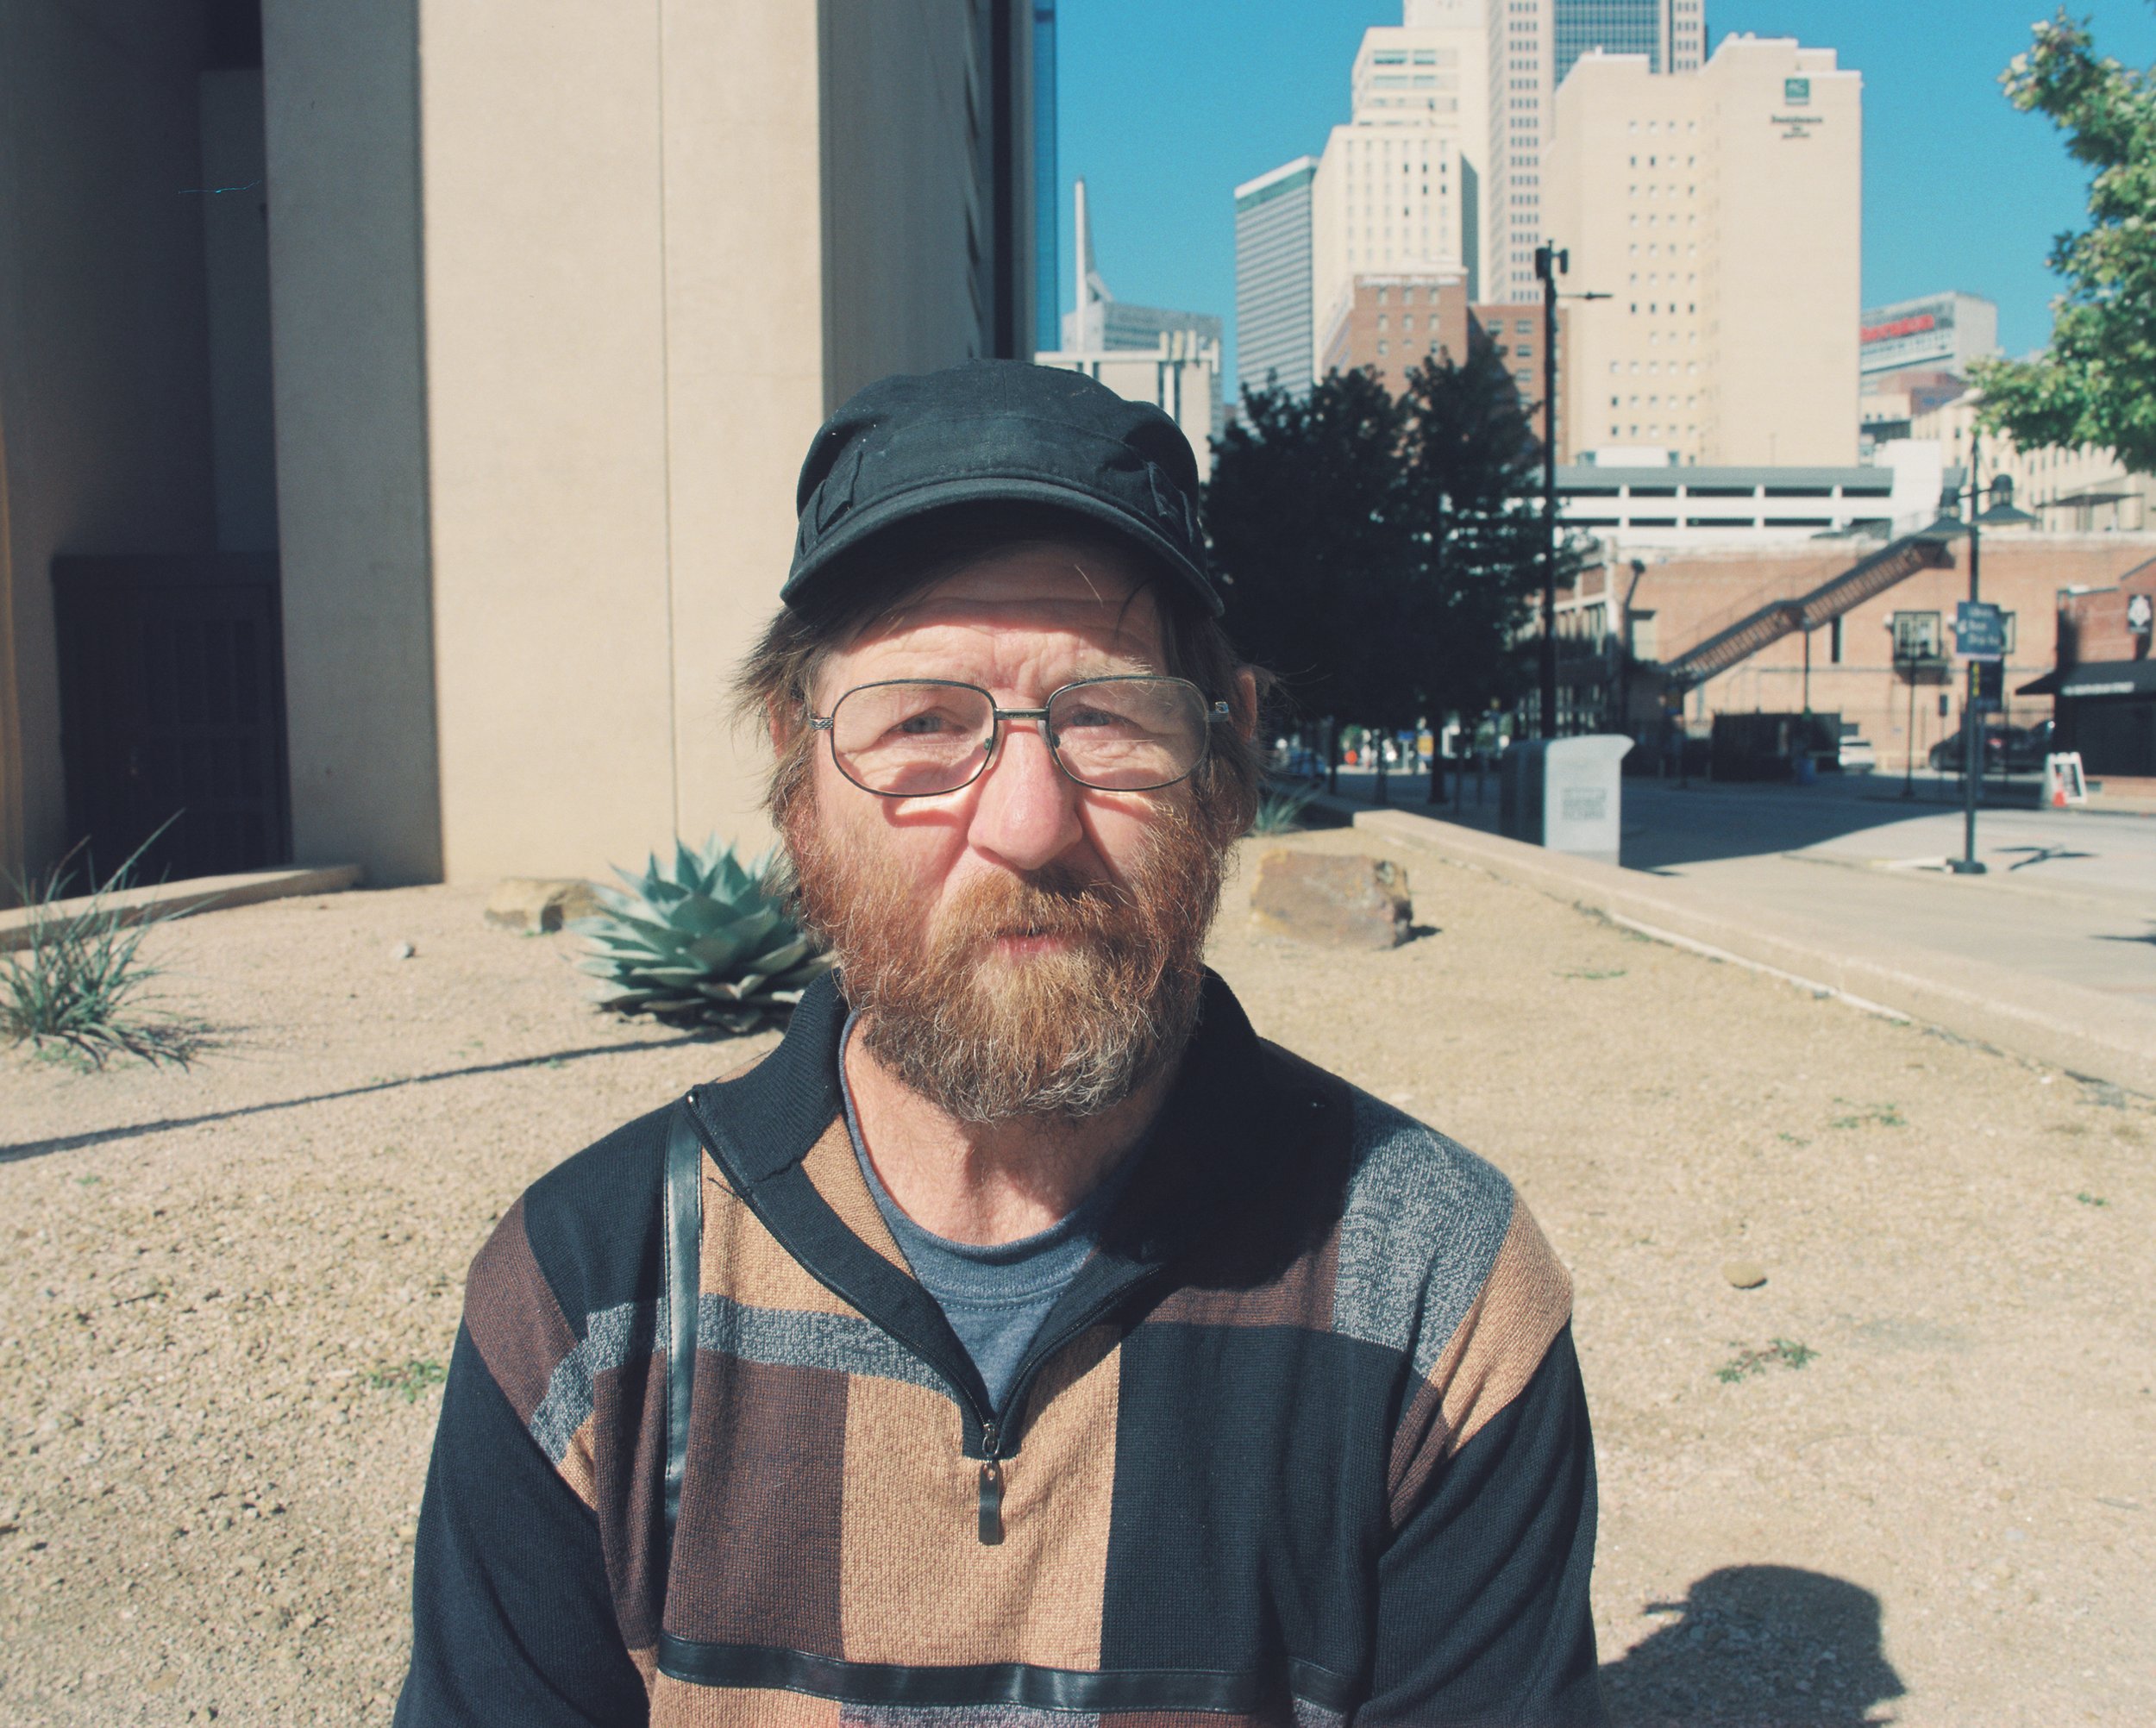  Joe, 59, is from Boston. He is actually a wandering homeless person that has been in Dallas for a few months. He's constantly on the move from city to city hitchhiking. Joe doesn't like the shelters as he doesn't like the conditions and rules. He fe